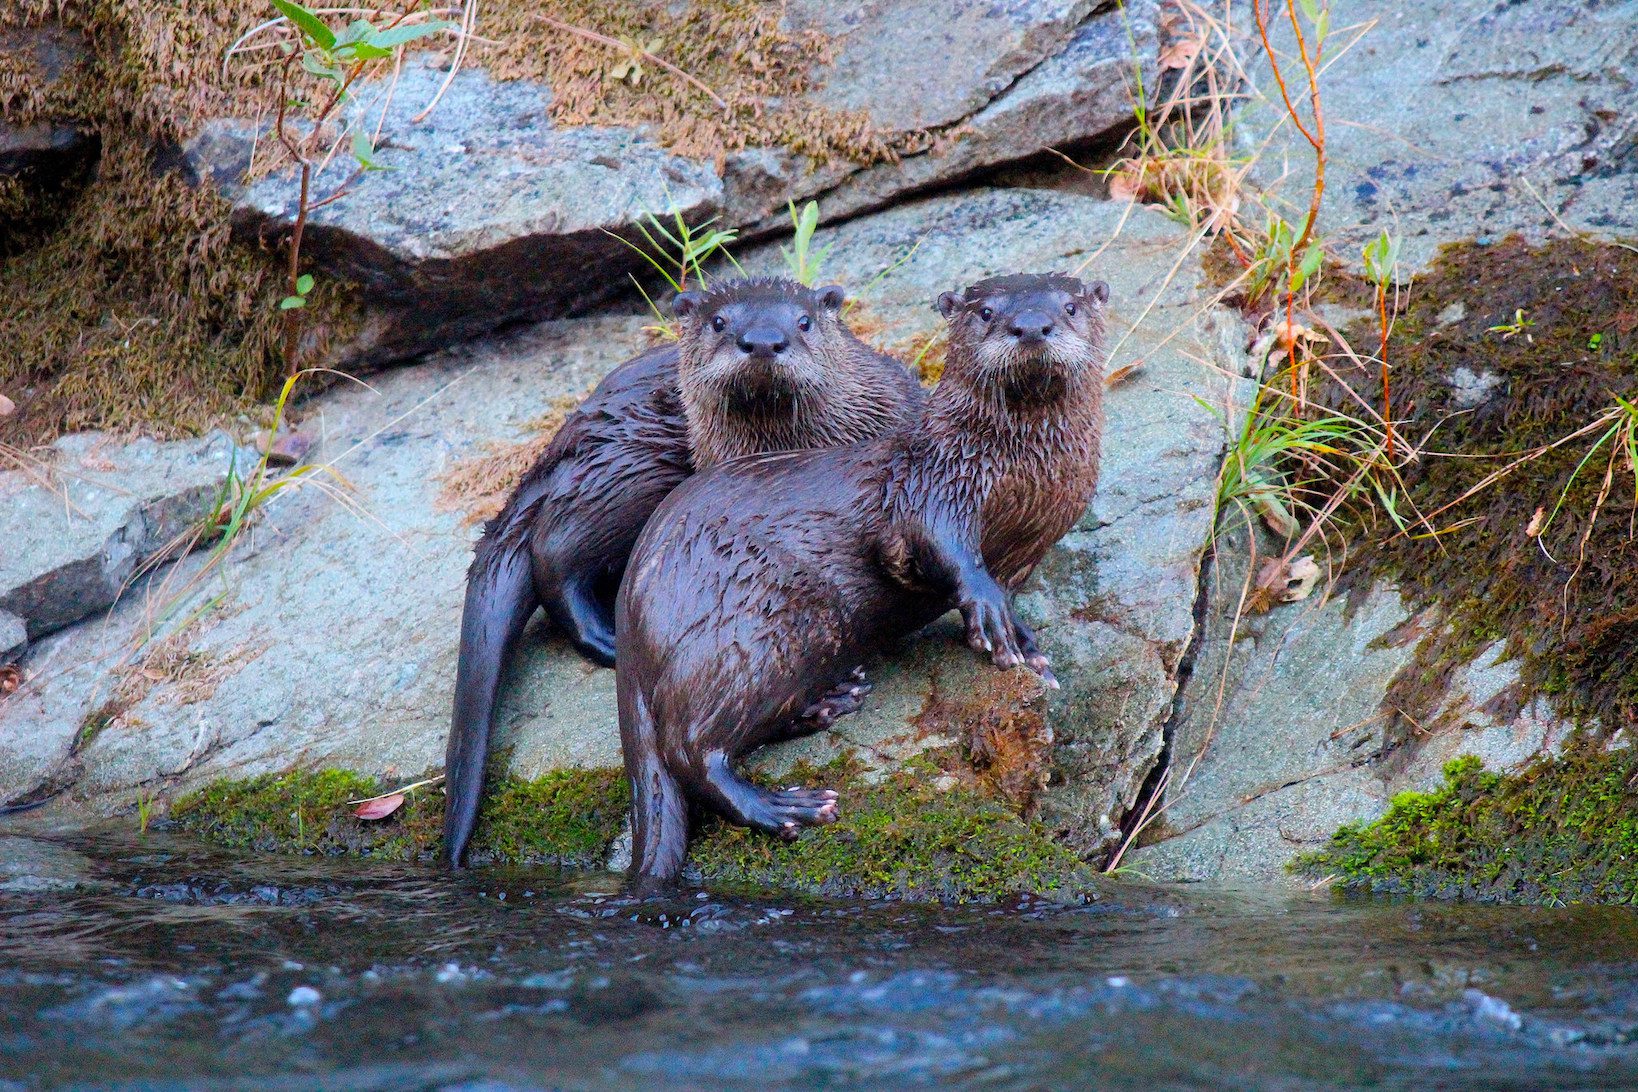 River otters posing